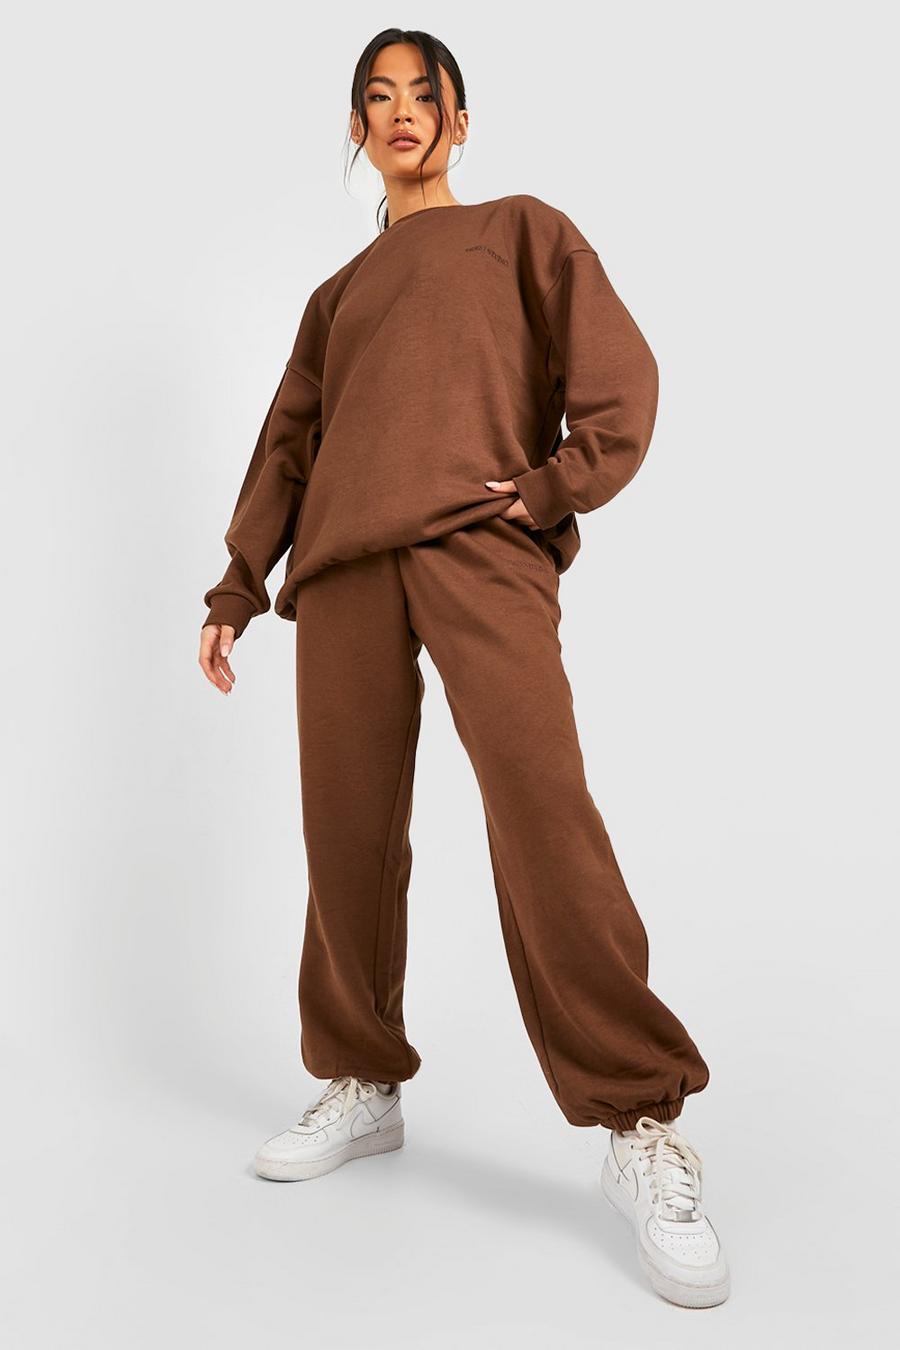 Chocolate marrone Slogan Embroidered Oversized Sweater Tracksuit